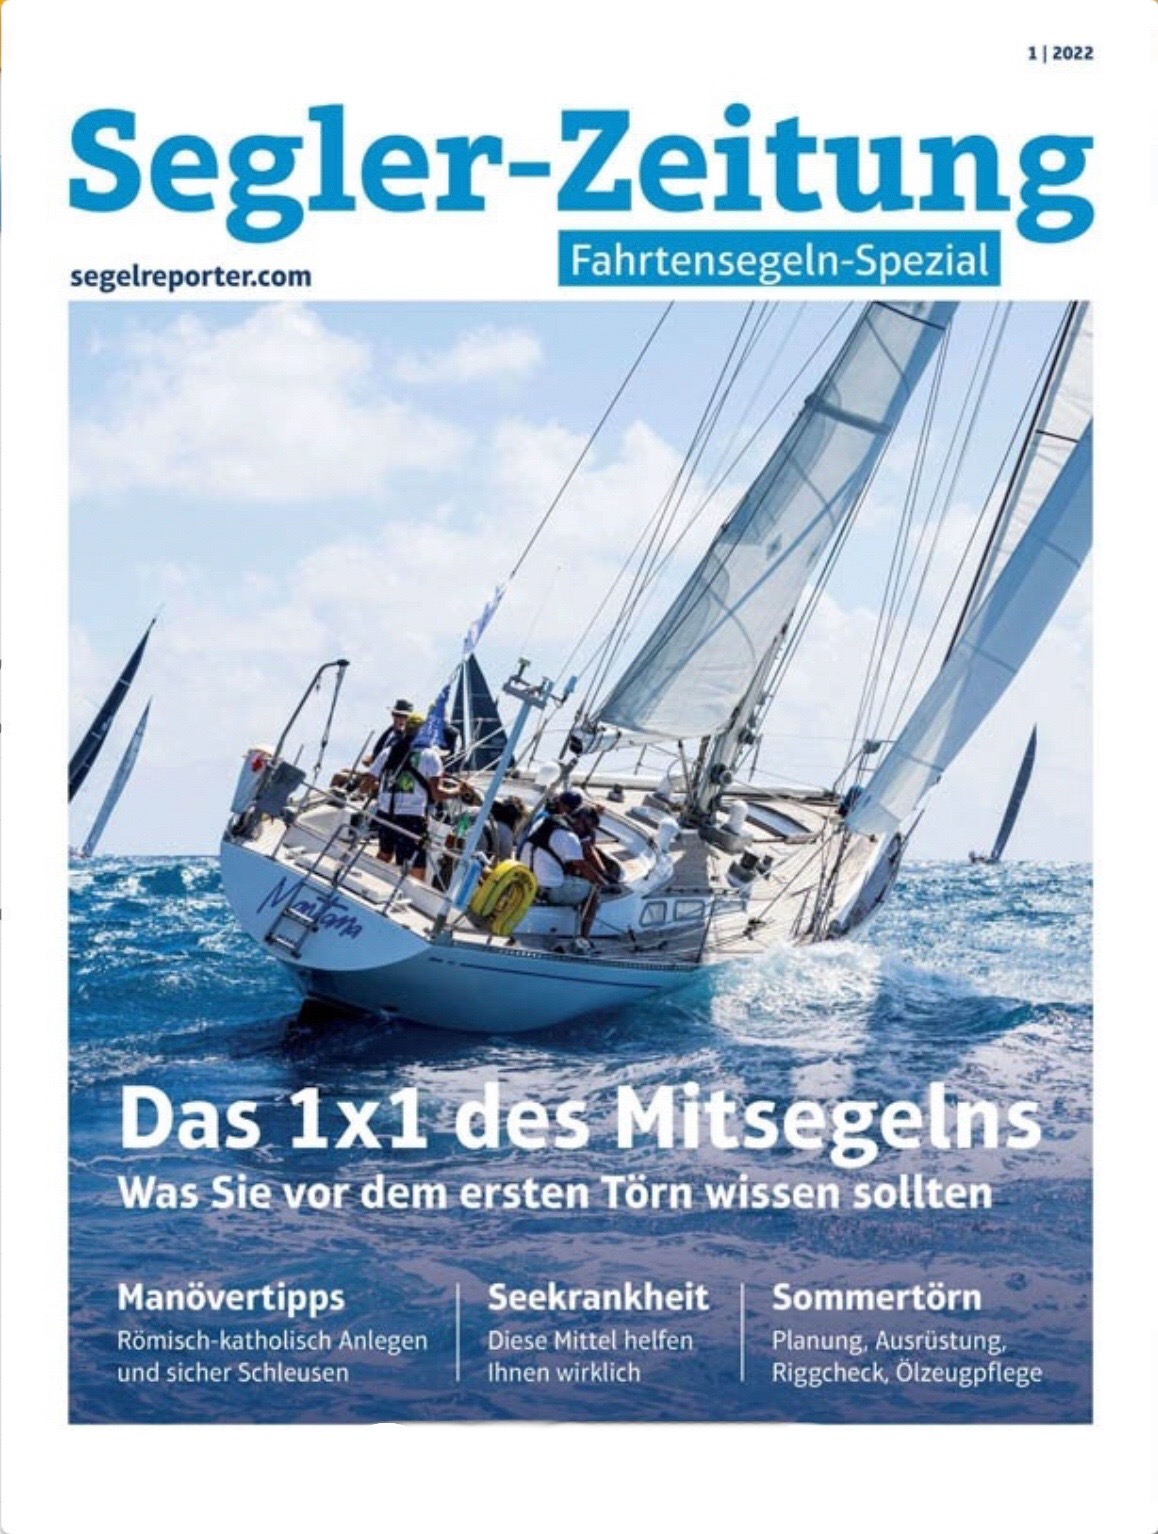 SY Montana, Swan 48 on the Cover of Segler-Zeitung